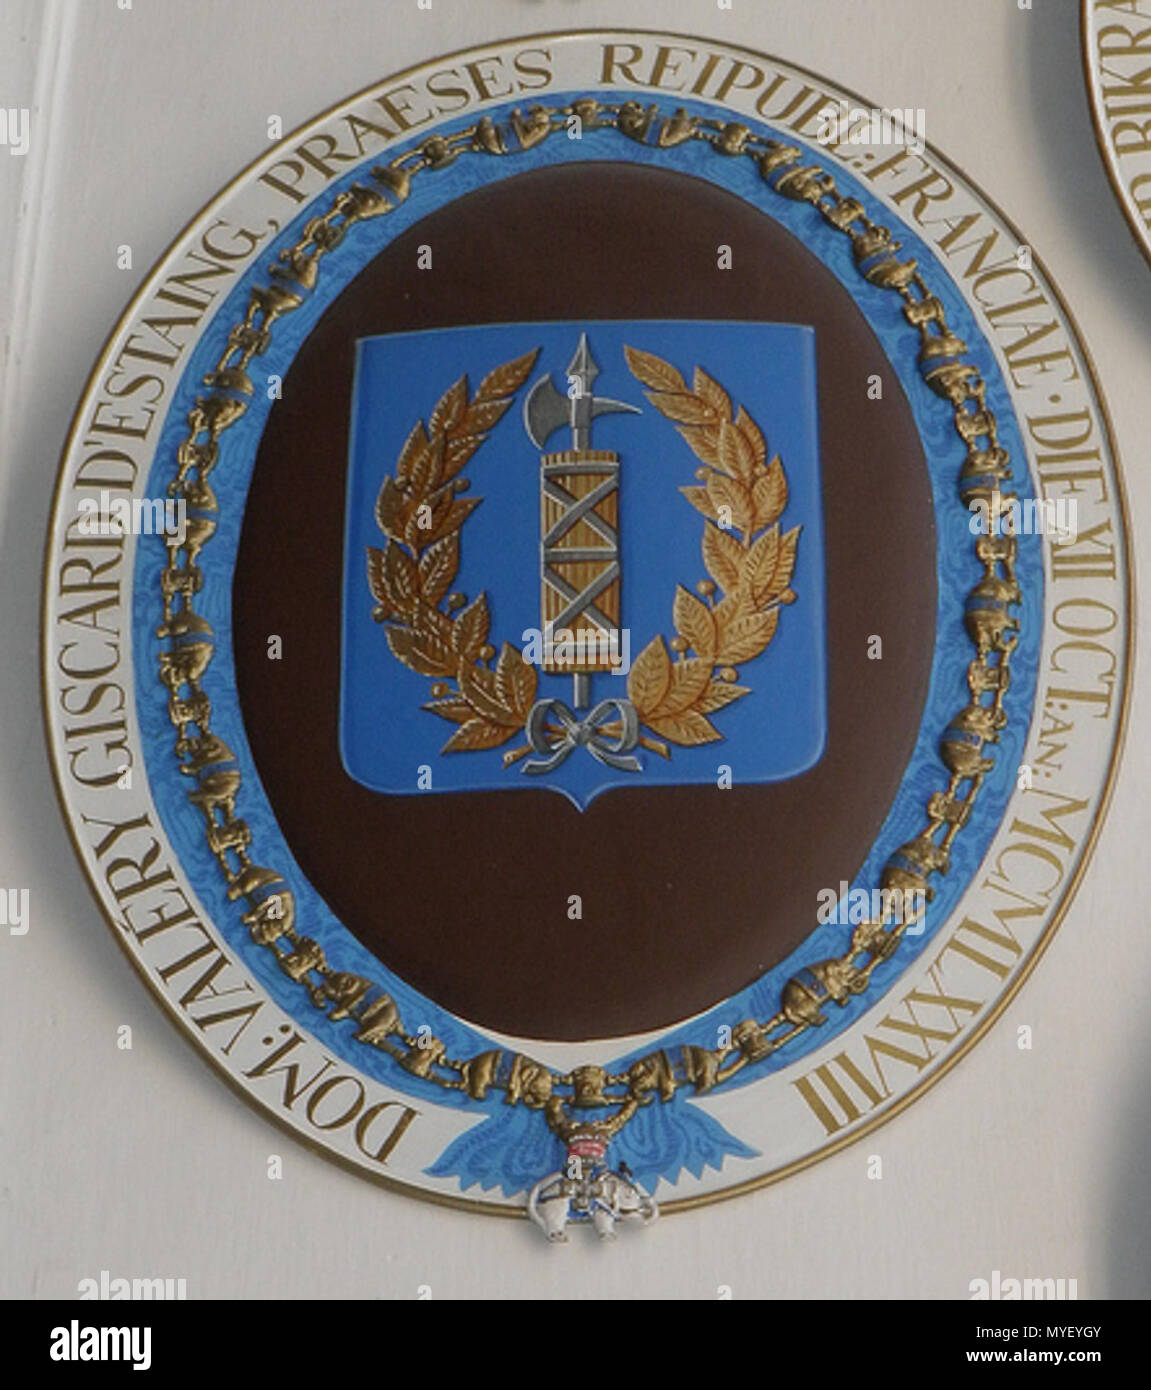 . English: Stall plate of Valery Giscard d'Estaing, President of France, as a Knight of the Order of the Elephant . 28 August 2013, 19:20:43. Jorgen Pedersen 213 Vgearms2 Stock Photo